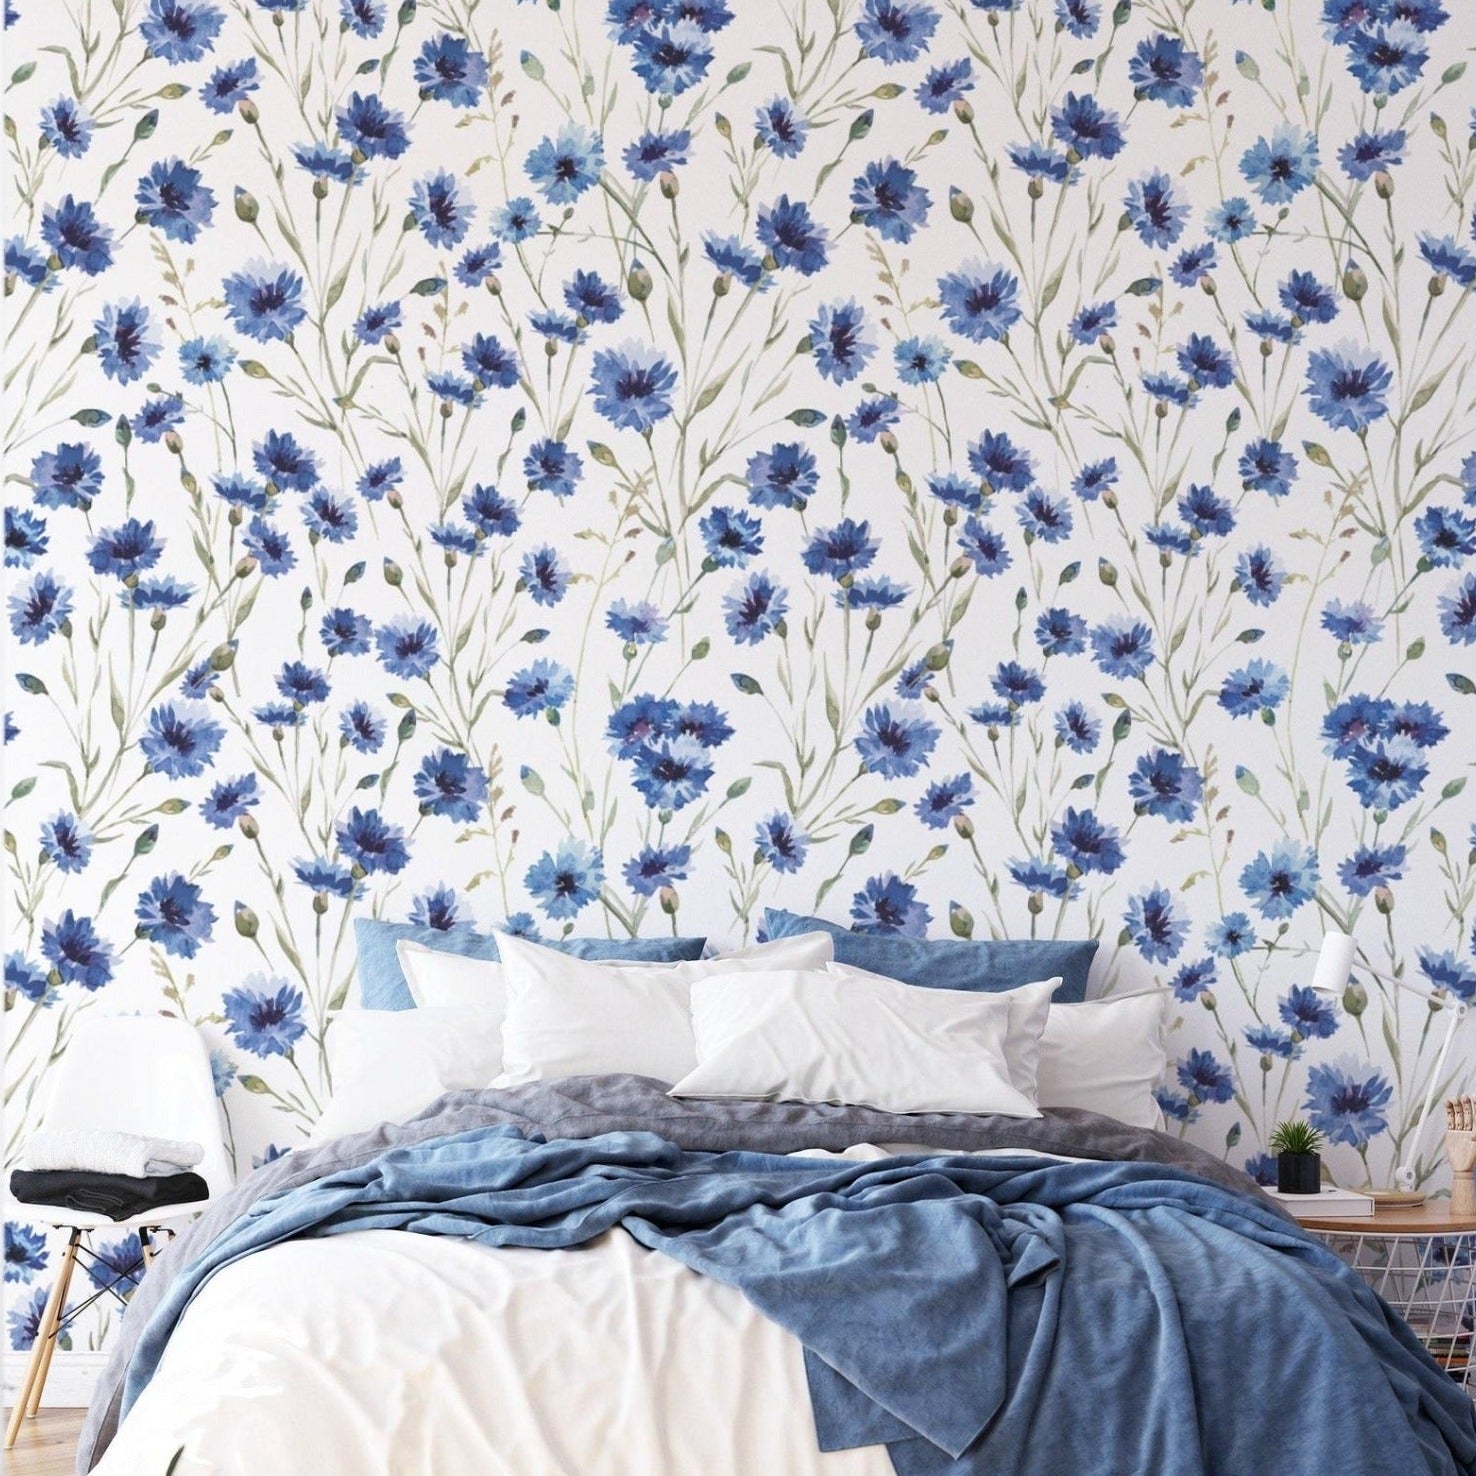 A bedroom with the 'Hand Painted Blue Floral Wallpaper' providing a striking statement behind a simple bed dressed in white and blue linens, blending artistic flair with a calming sleeping environment